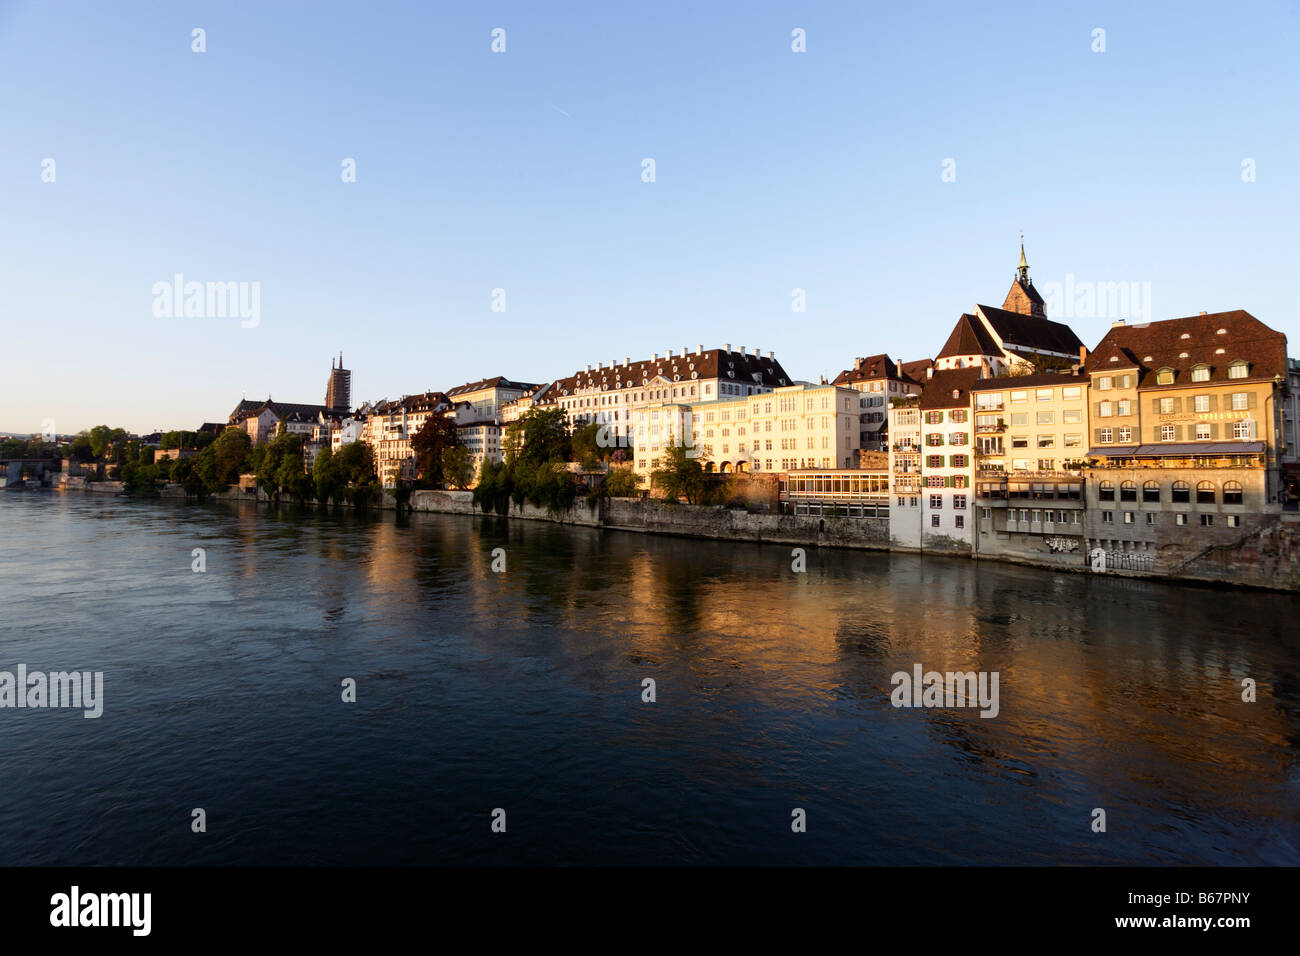 Riverbank with Basel Muenster and St. Martins Church in the background, River Rhine, Basel, Switzerland Stock Photo